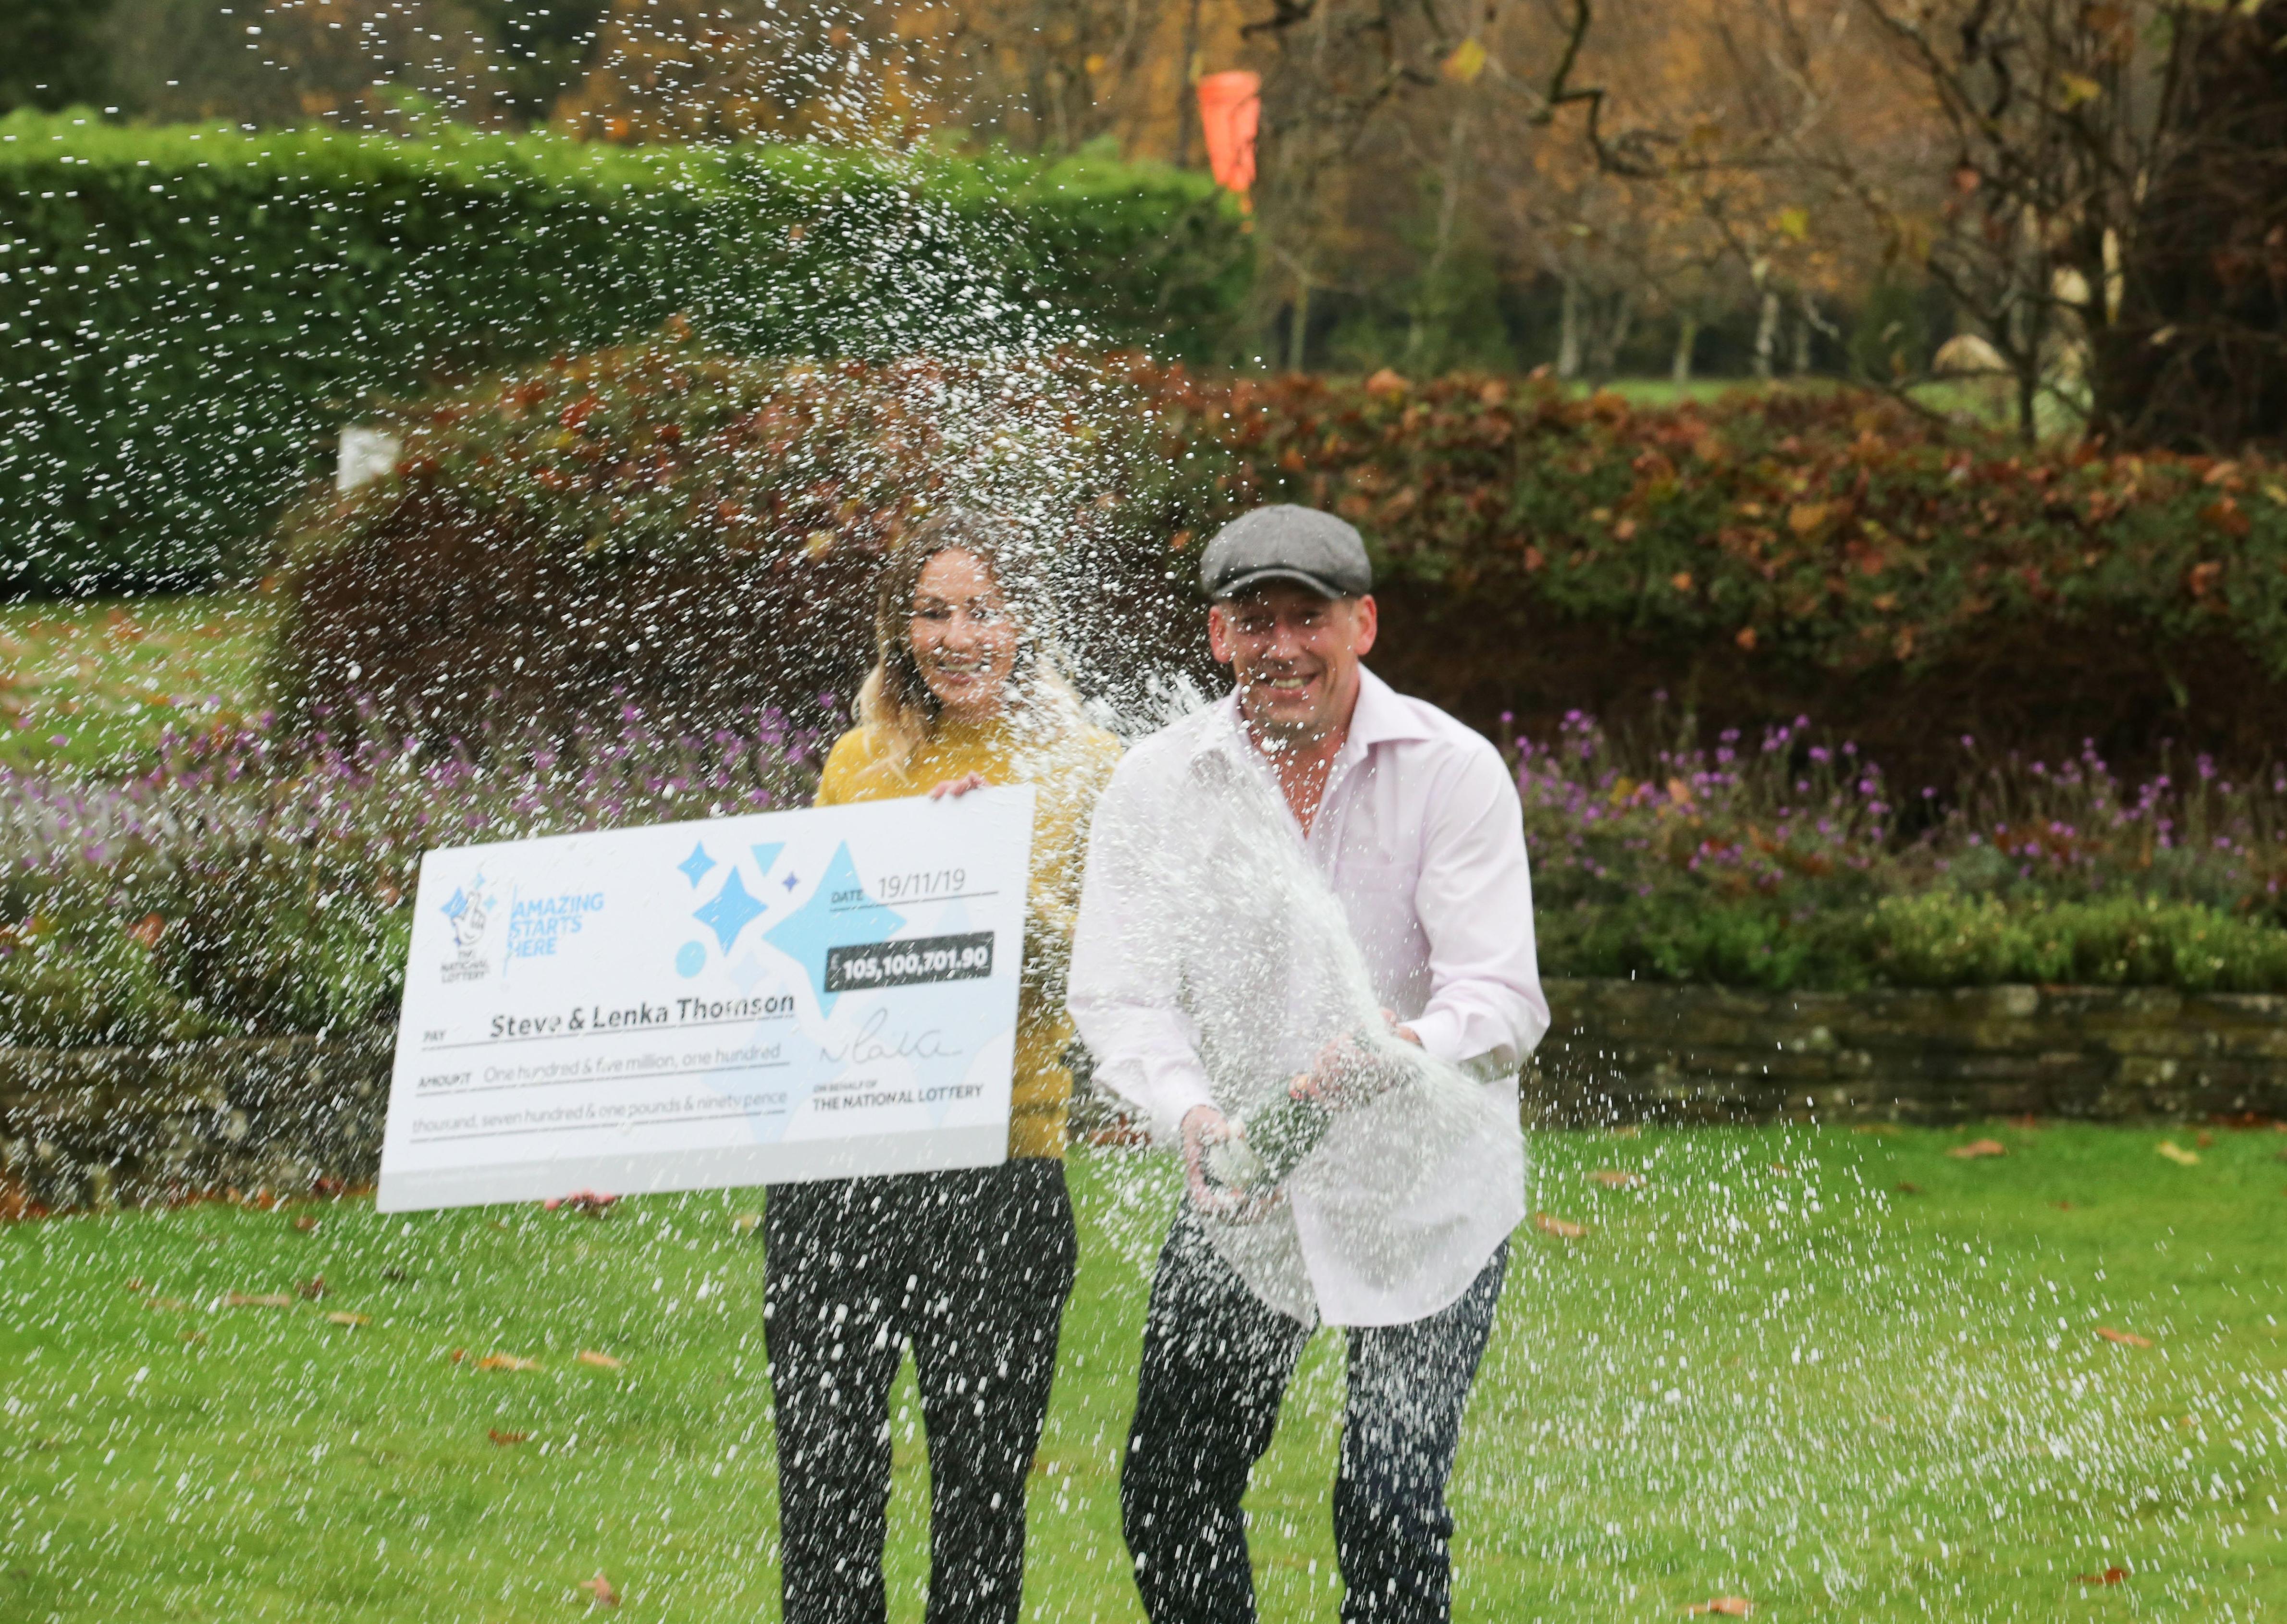 Selsey couple Steve, a 42-year-old builder, and Lenka, a 41-year-old shopworker, have won £105,100,701.90